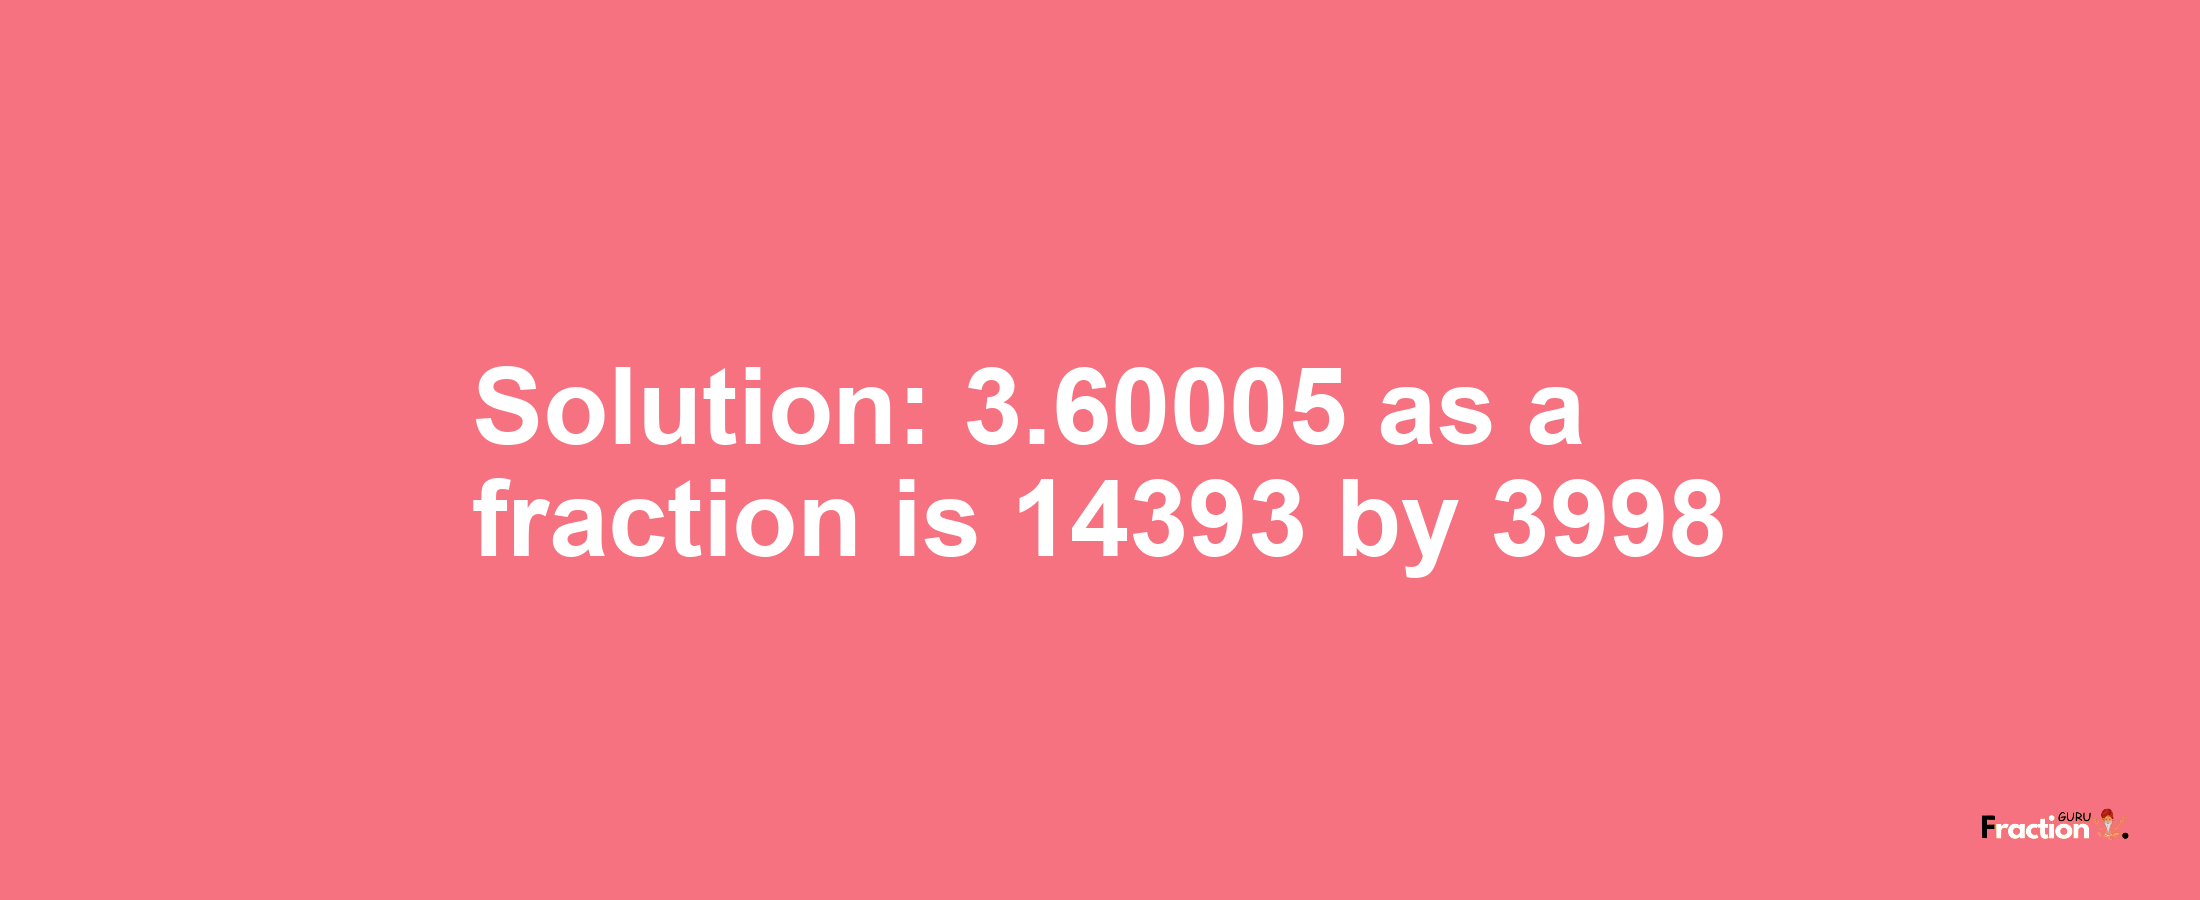 Solution:3.60005 as a fraction is 14393/3998